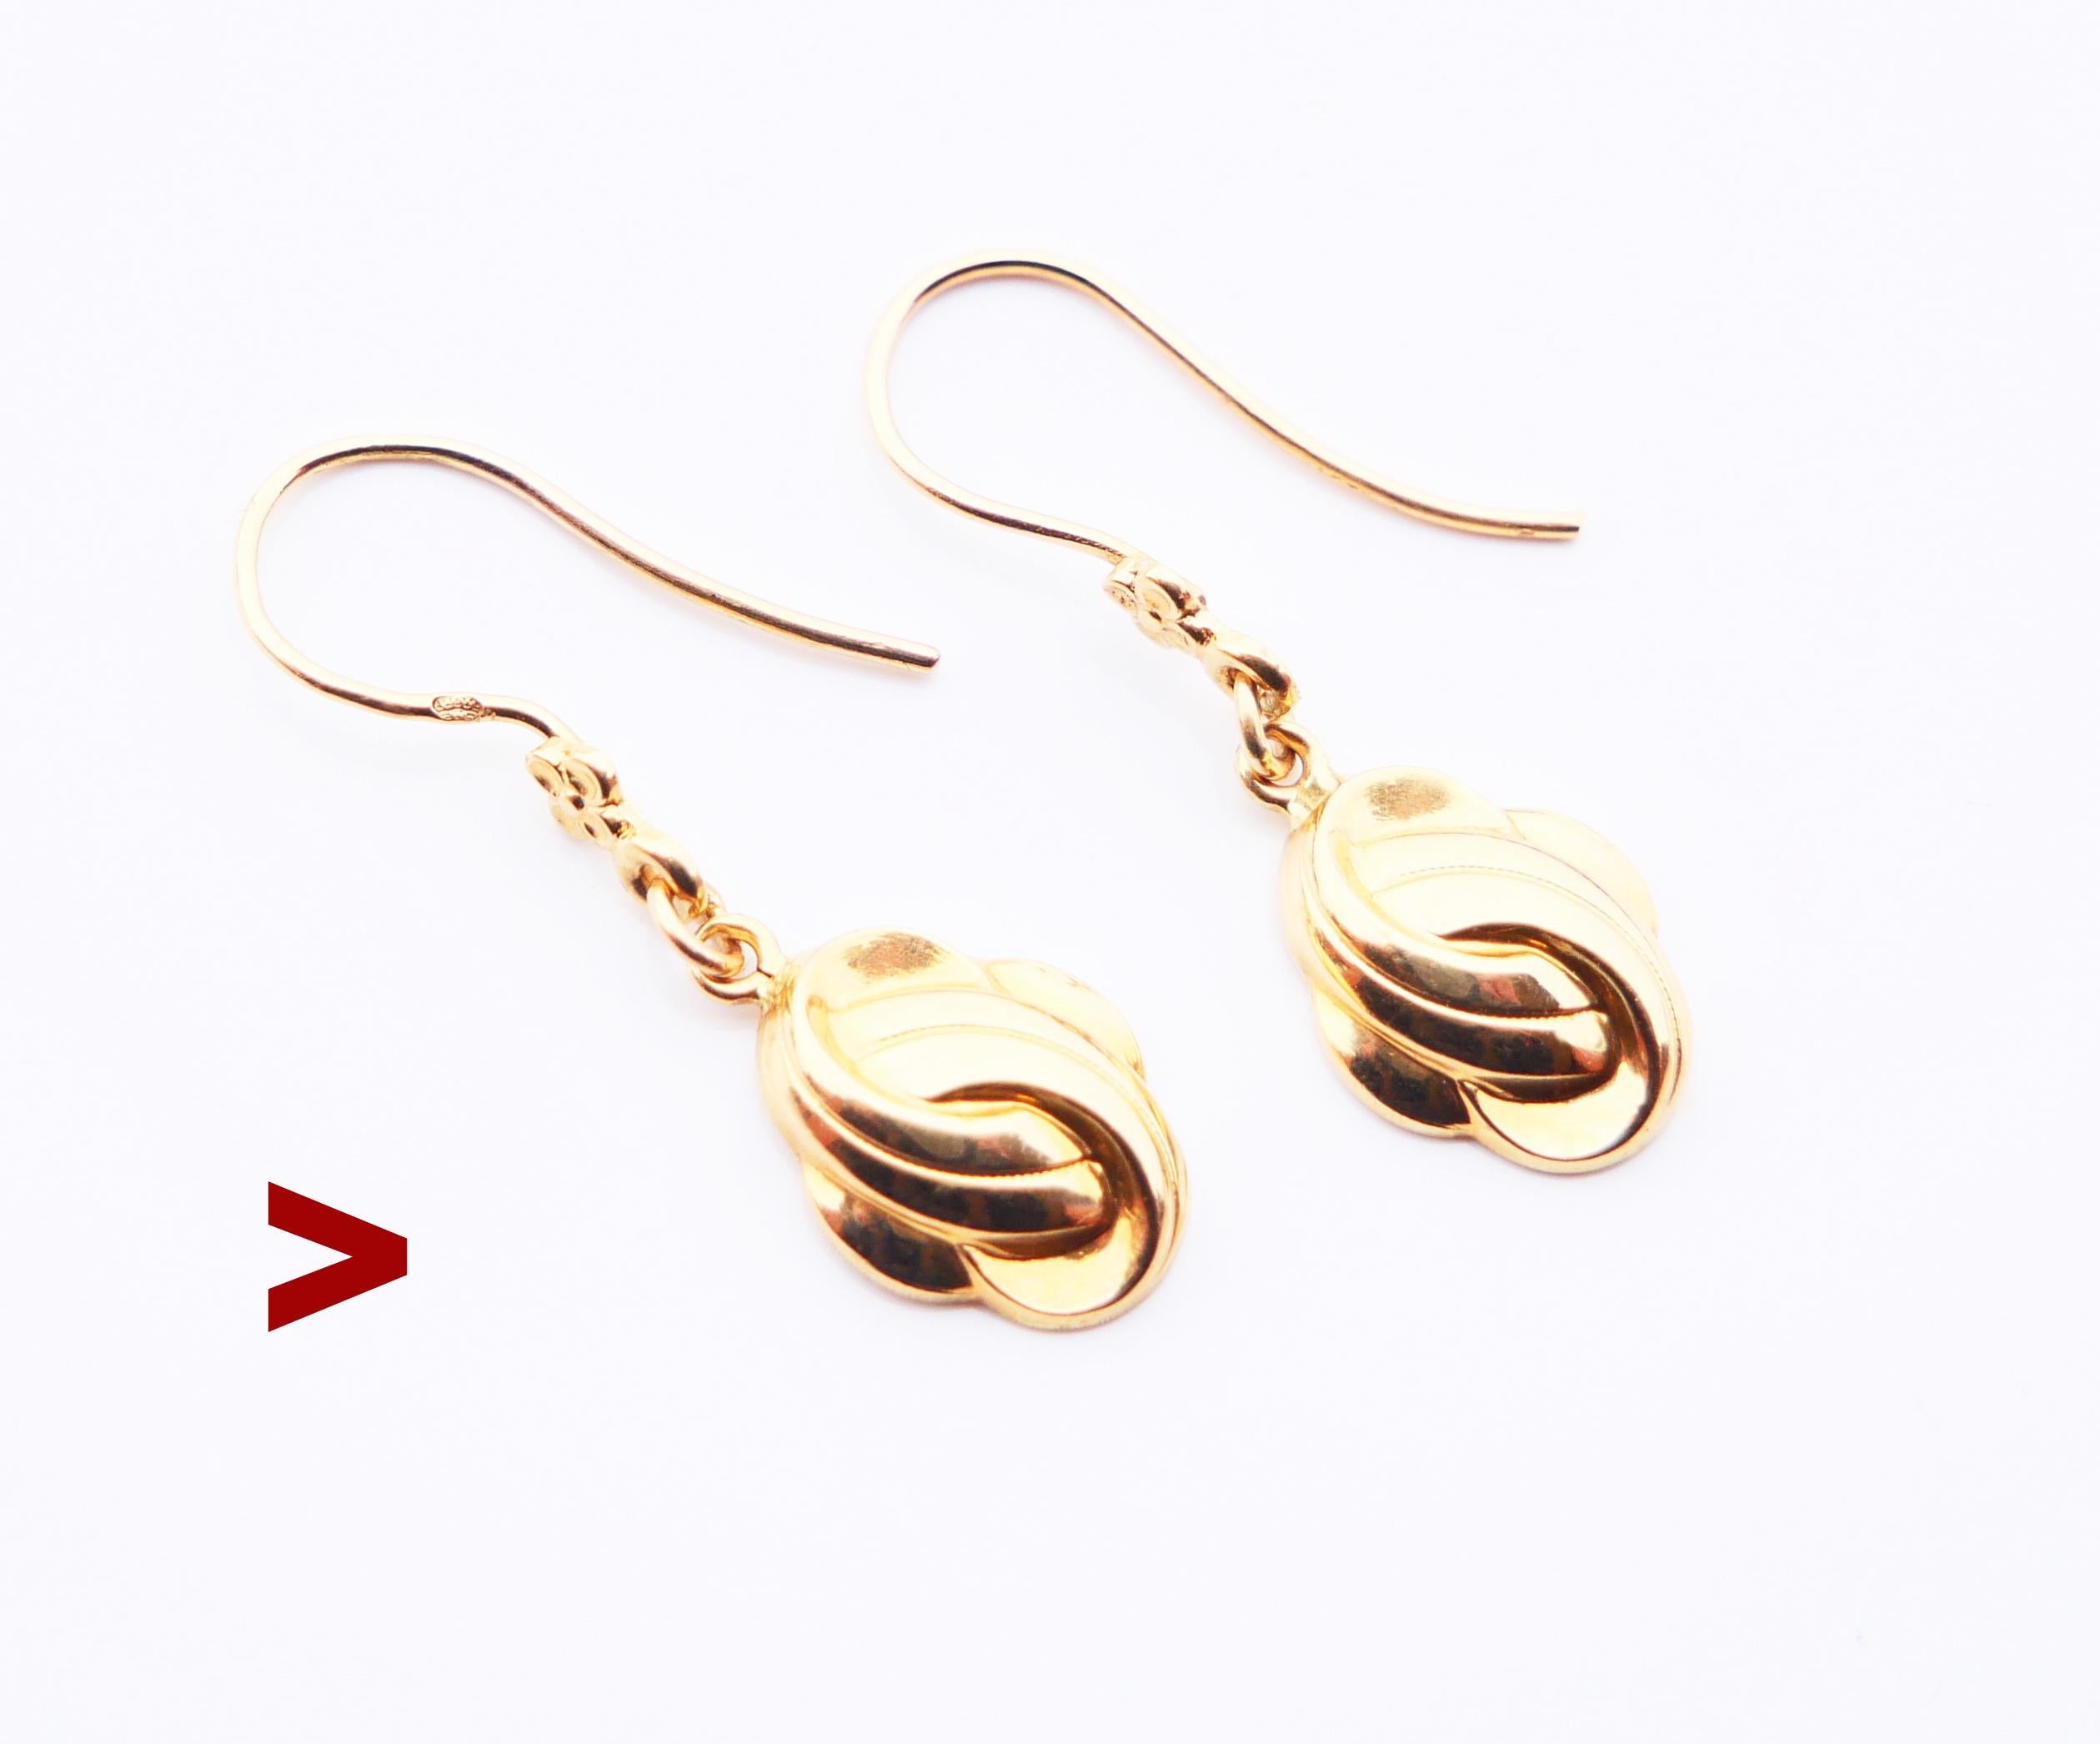 A pair of older earrings with freely suspended bodies designed as knots in solid 18K Yellow Gold .

Pendants are hollow inside,polished,shiny and very reflective. Each earring is 32mm long including the hook.

Swedish import 18K hallmarks on both,